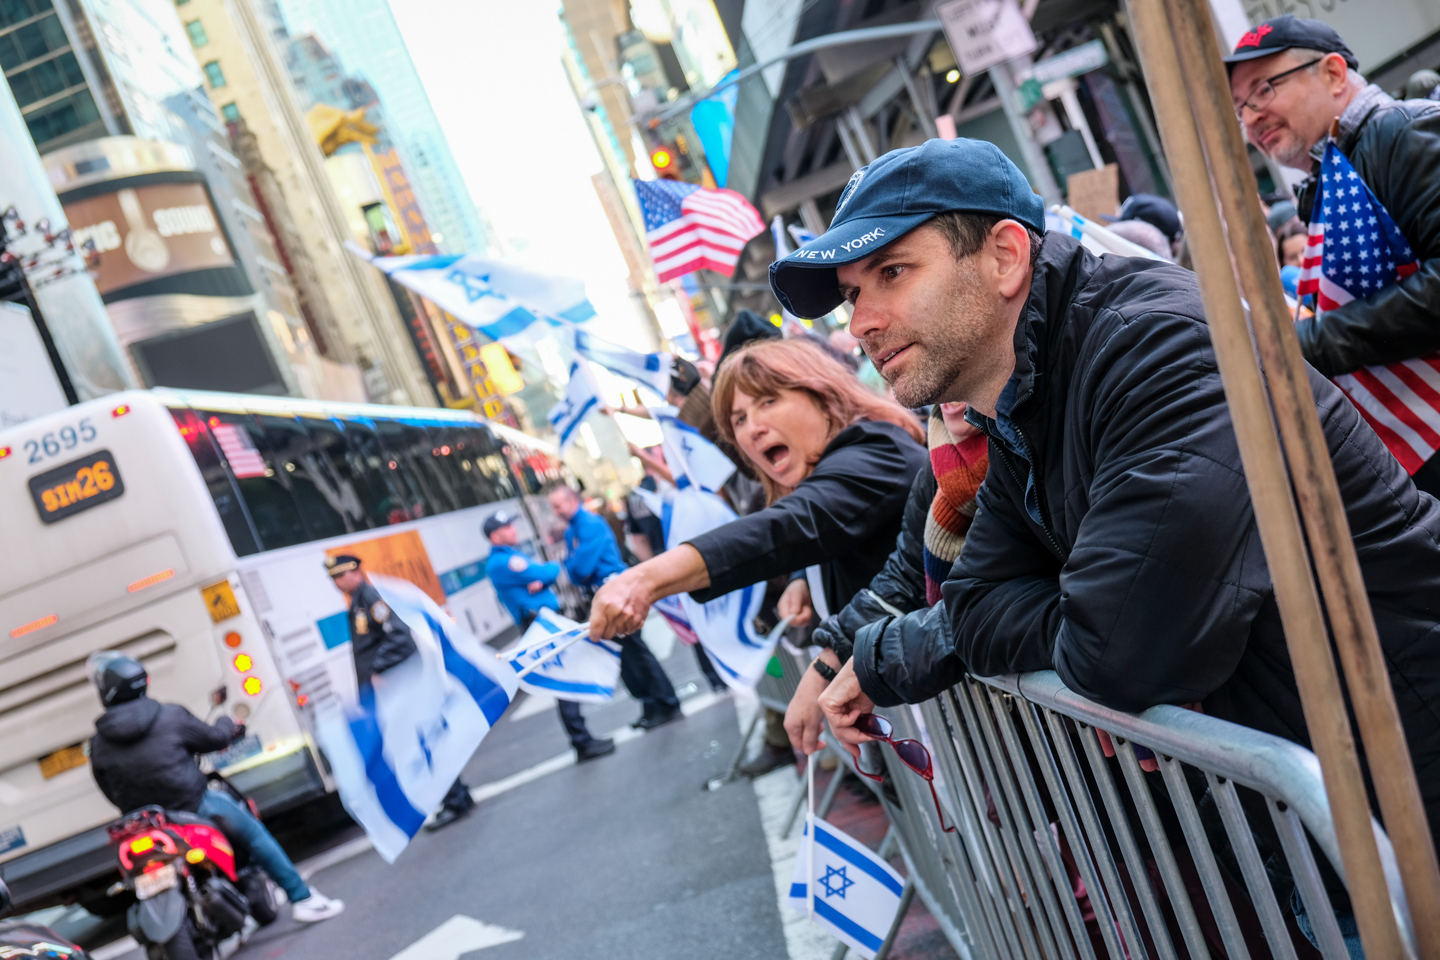 Around 100 pro-Israel counterprotesters gathered across the street from the main protest. Photo by Tess Owen. 